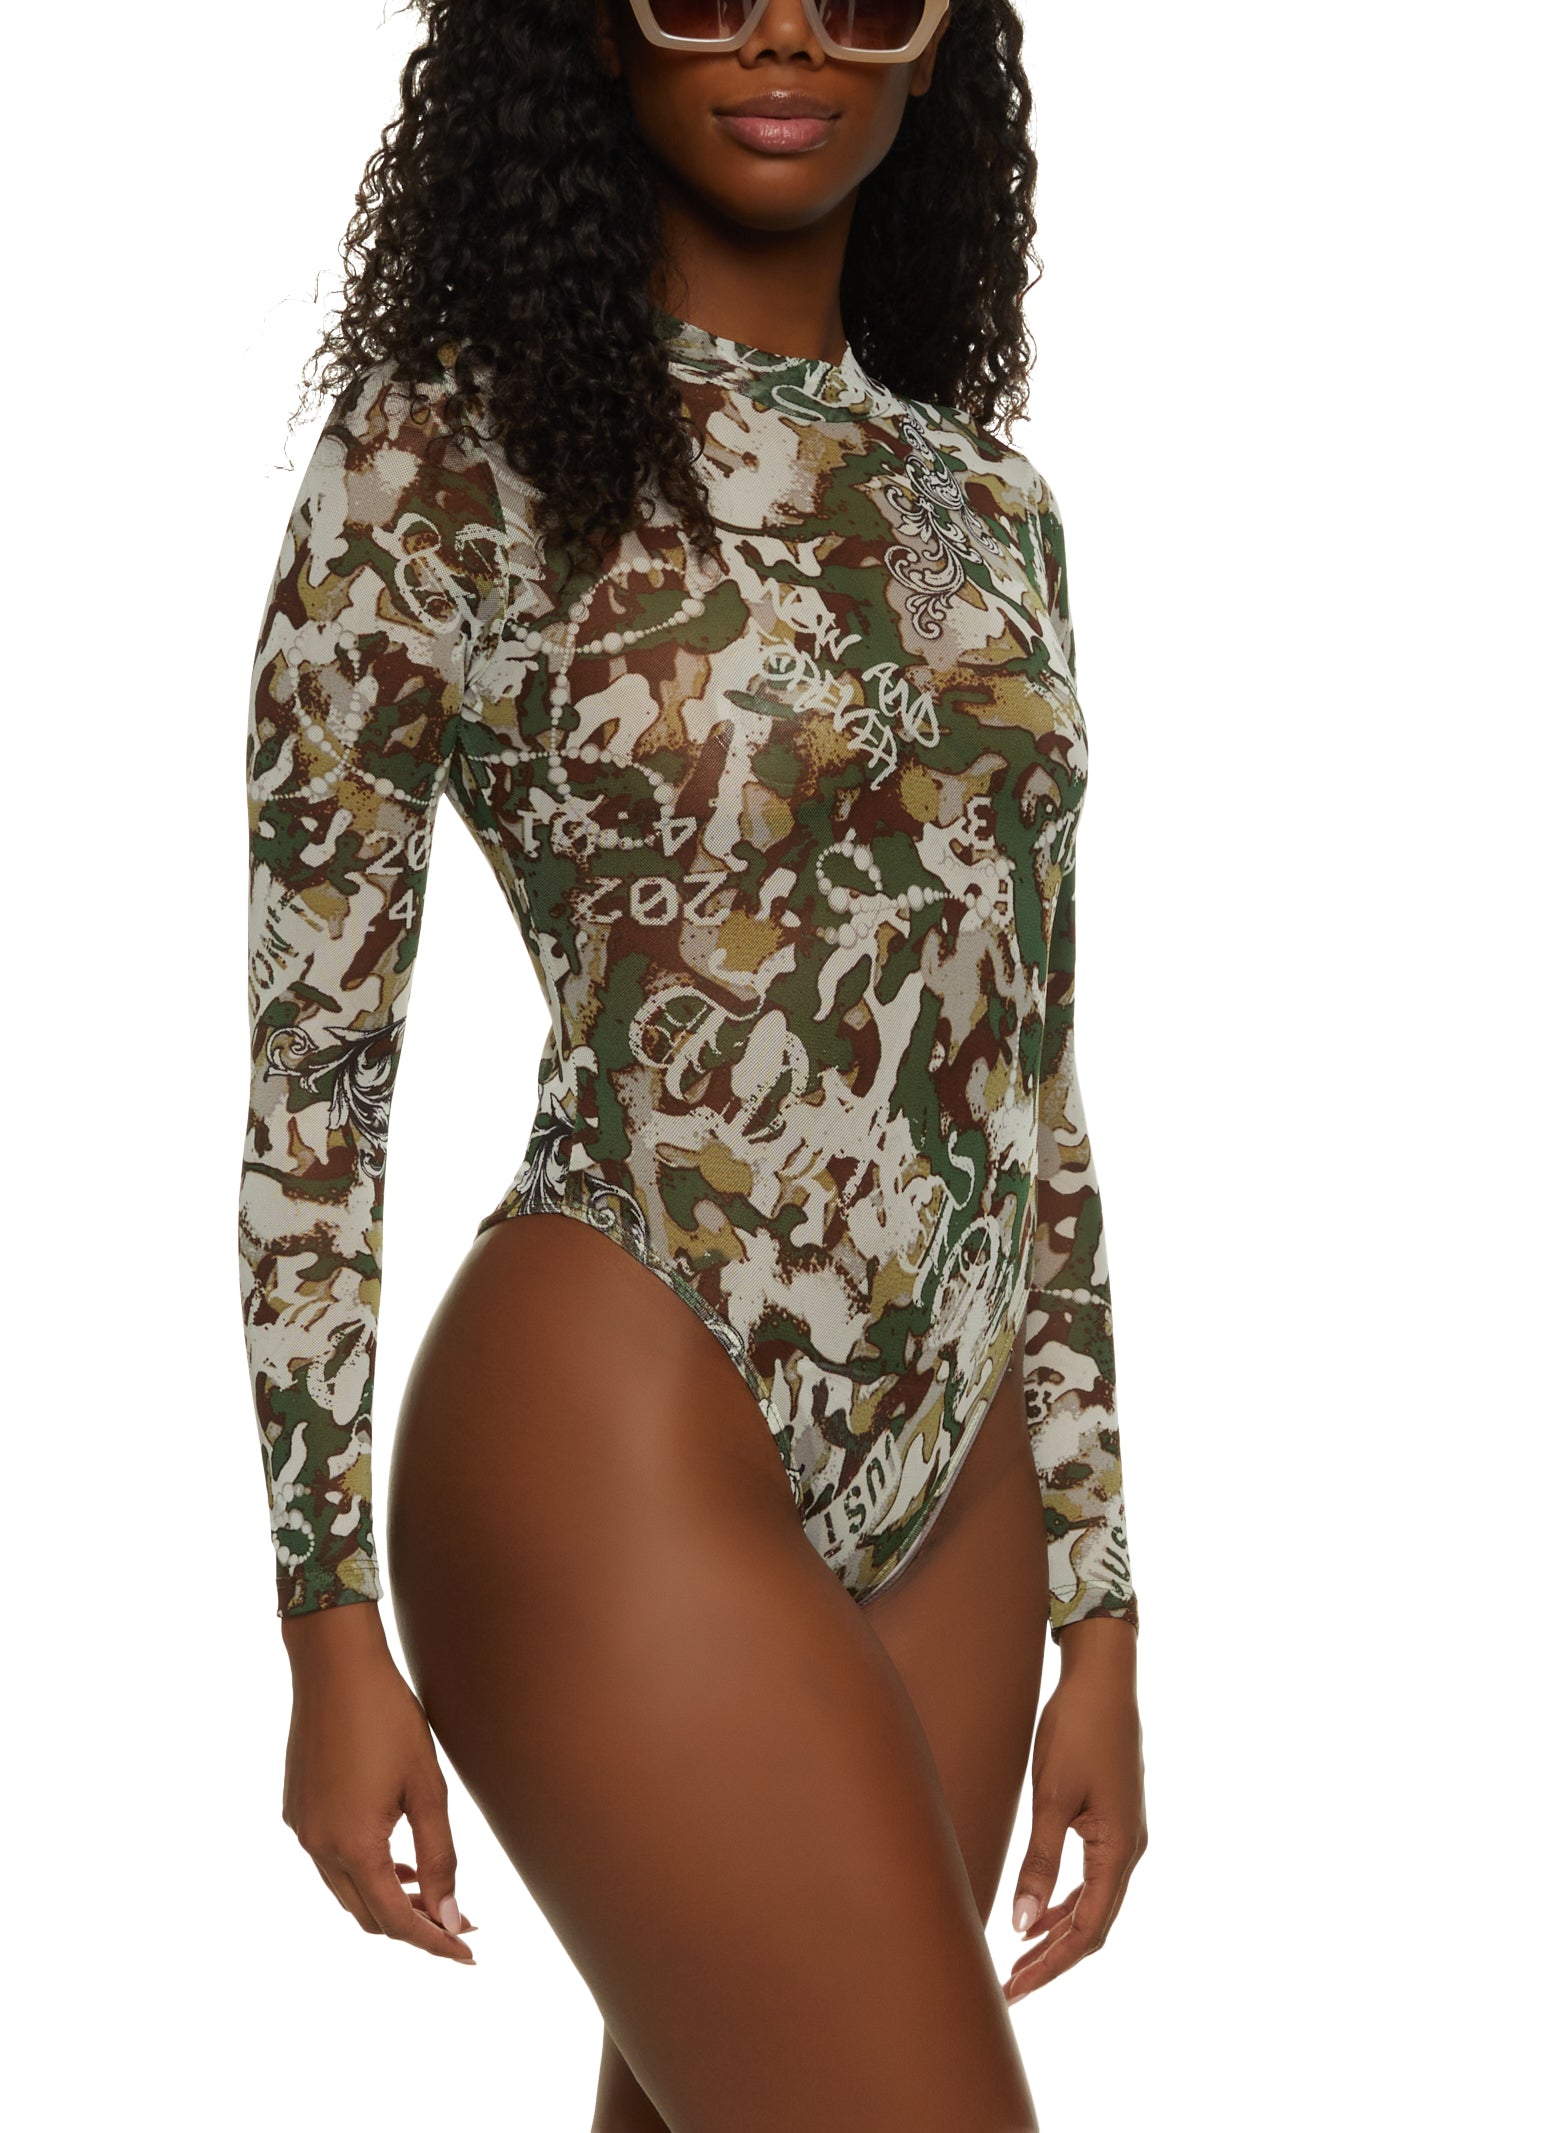 Green Bodysuits, Everyday Low Prices